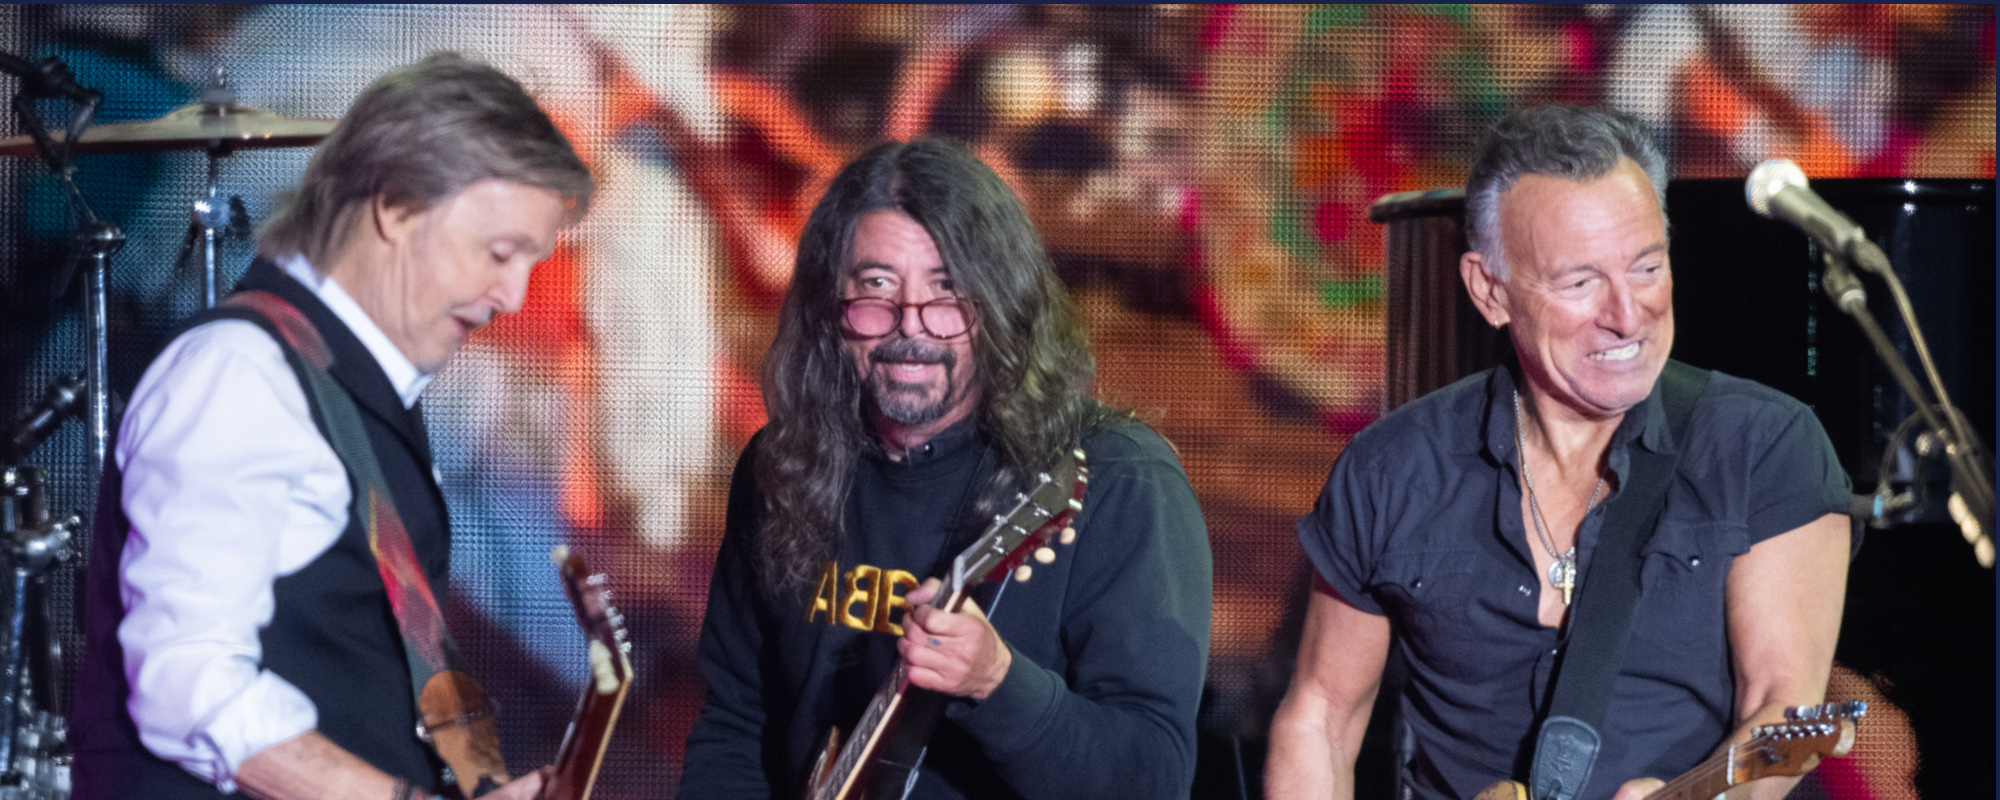 Foo Fighters Dave Grohl Makes First Public Appearance Since Taylor Hawkins’ Death at Glastonbury Festival